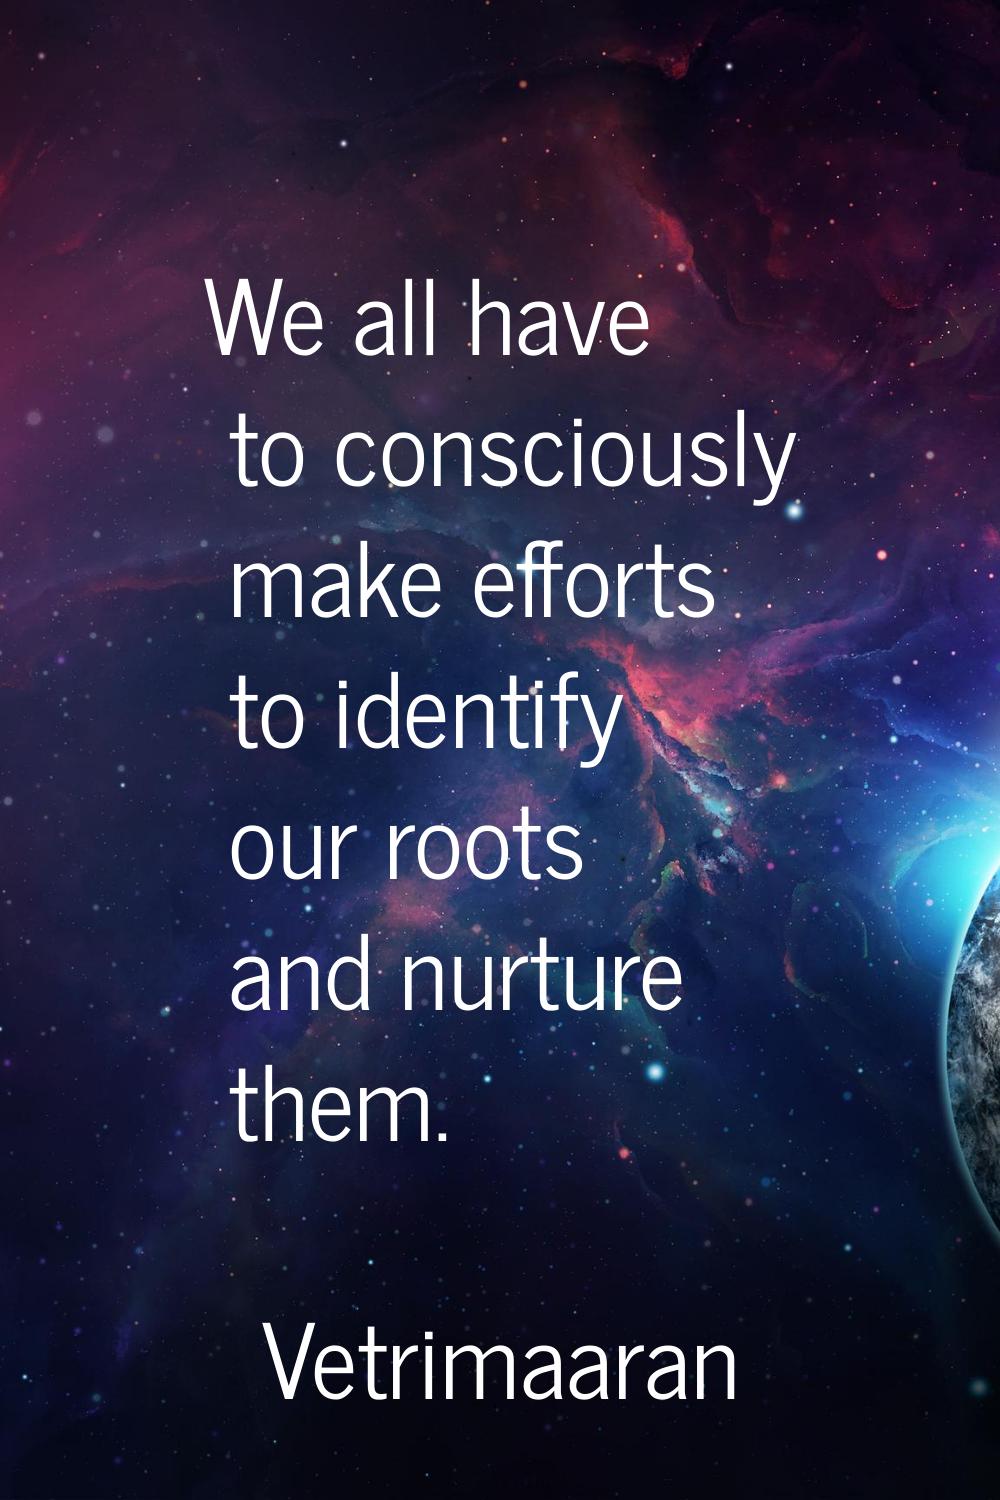 We all have to consciously make efforts to identify our roots and nurture them.